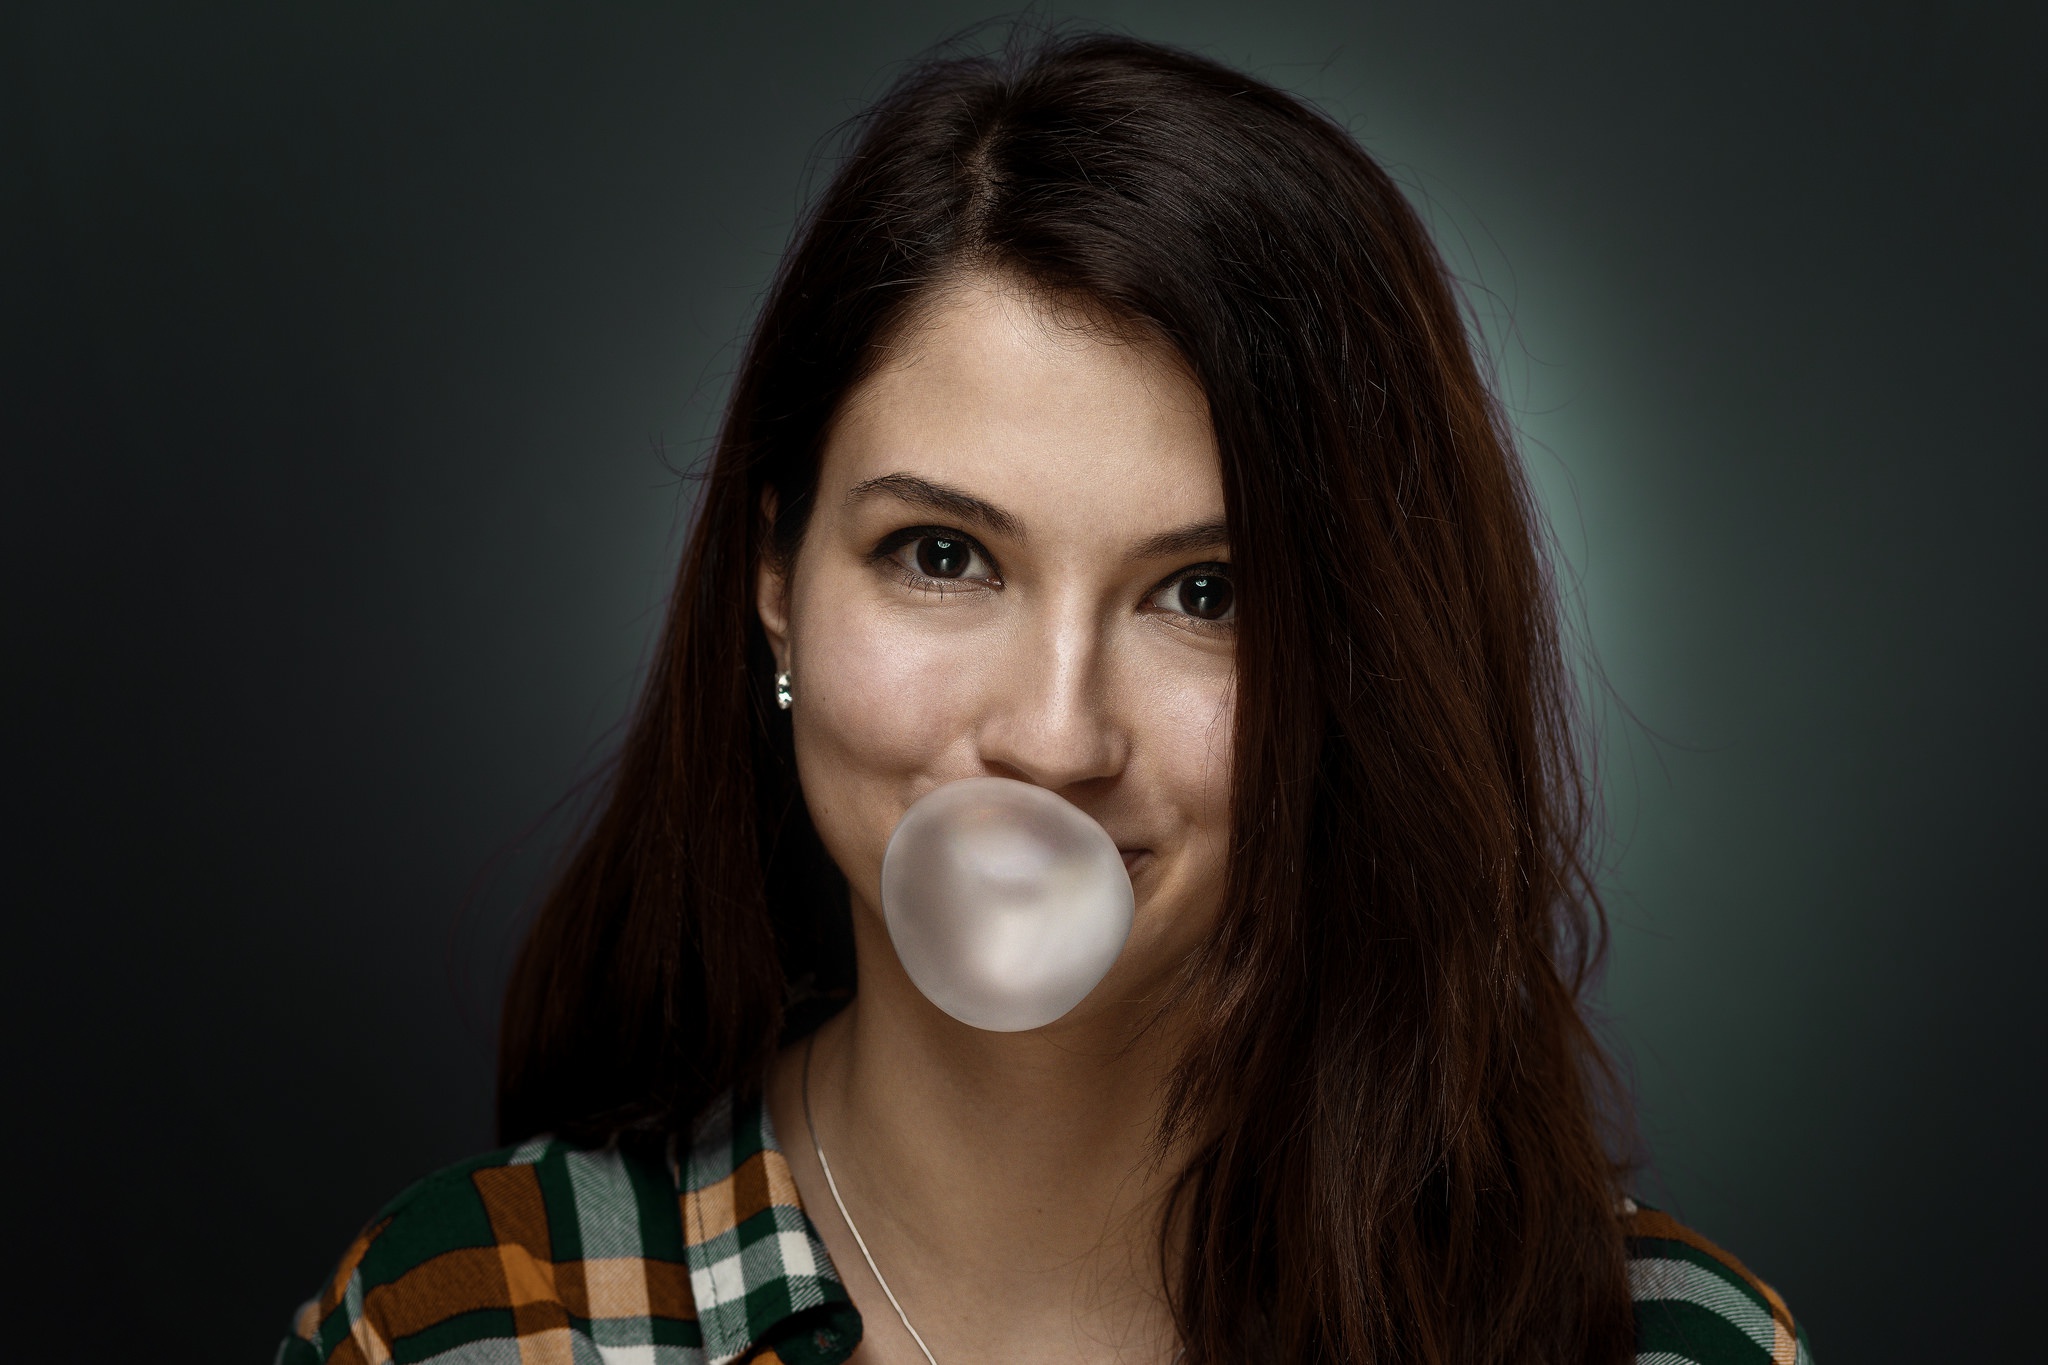 Woman Model Girl Face Chewing Gum Smile Brunette Brown Eyes 2048x1365